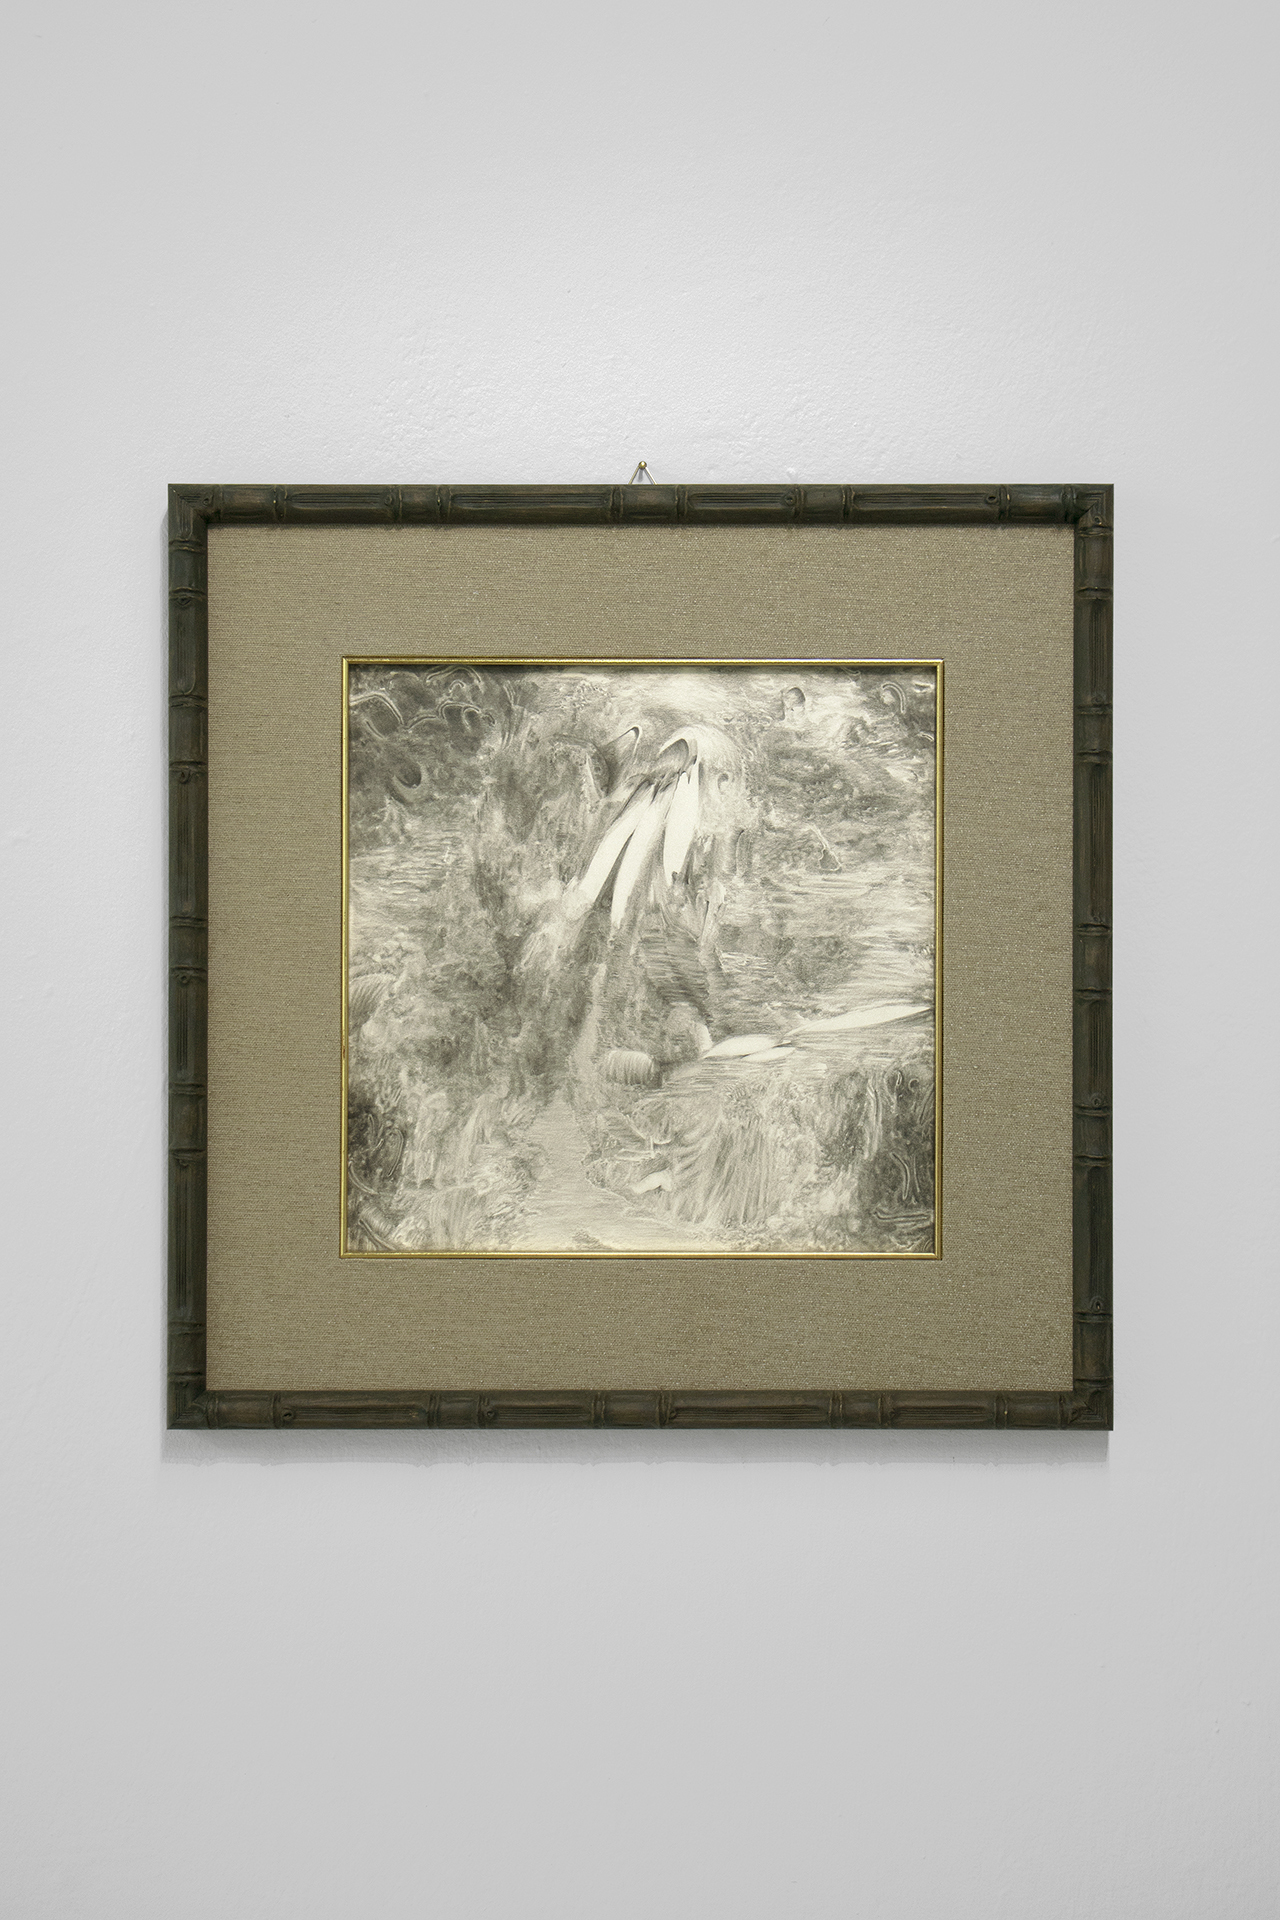 Andrea Magnani, Magdaleno Marcu (Magno), Untitled No. 13, circa 1939-1955, 2024. Pencil on paper, artist’s frame. 29,7 x 29,7 cm (drawing), 46 x 46 (frame).